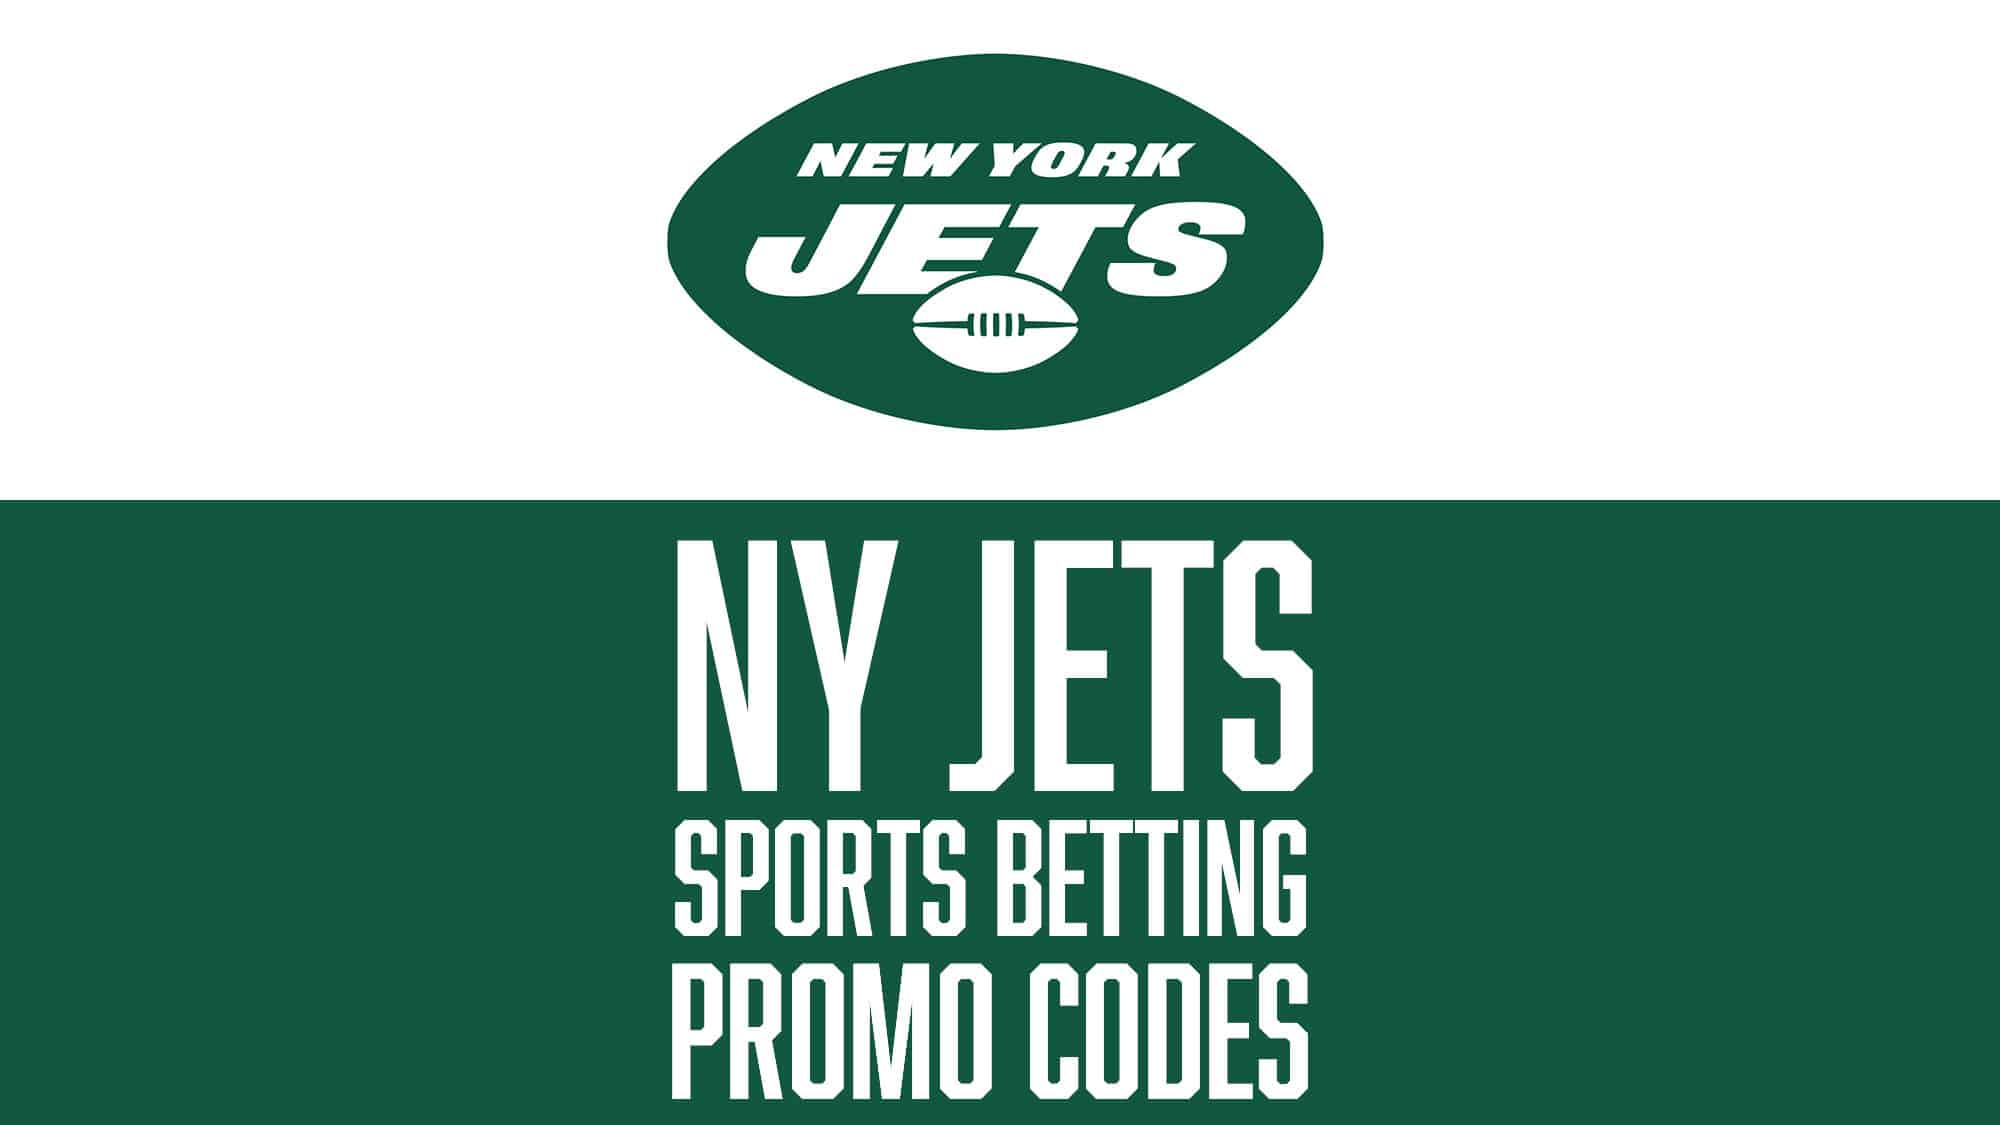 New York Jets Sports Betting Promo Codes